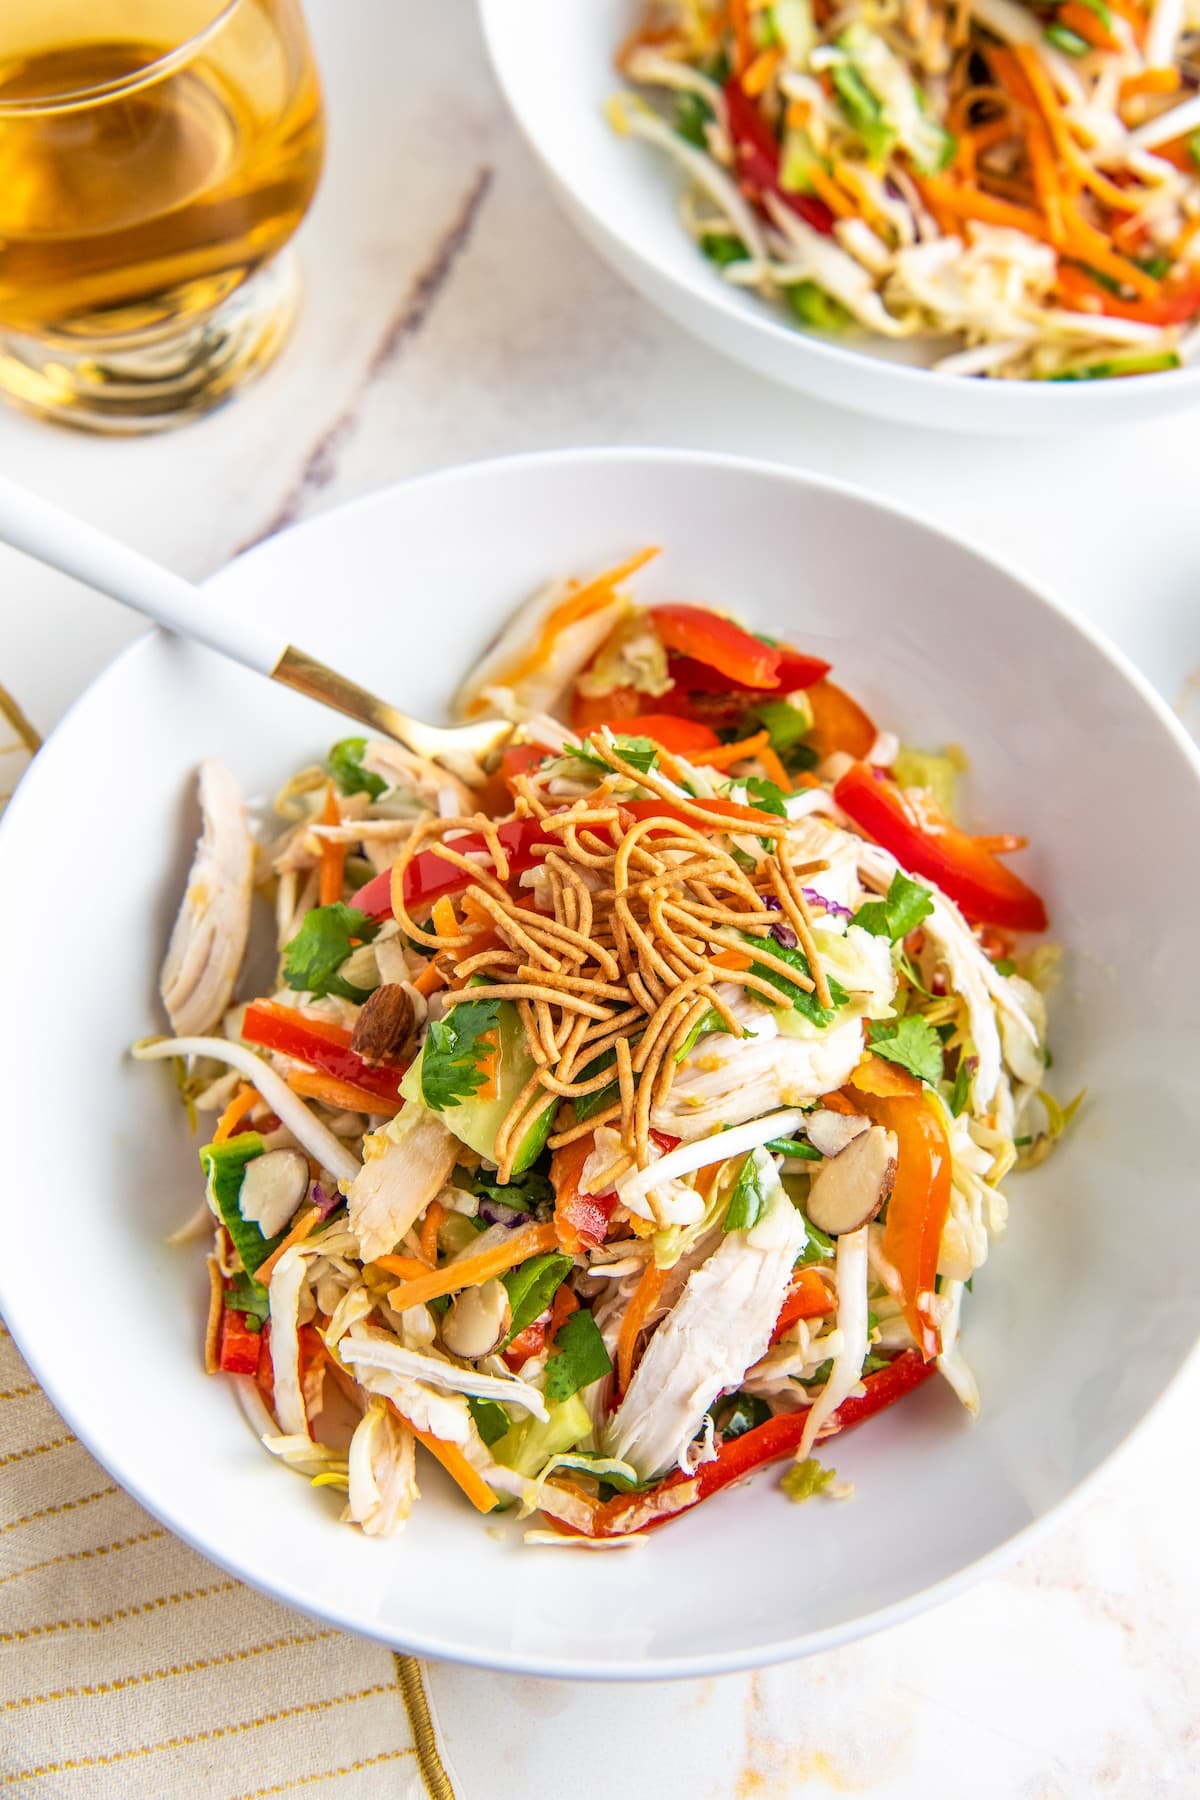 Asian chicken salad with fresh, chopped vegetables.